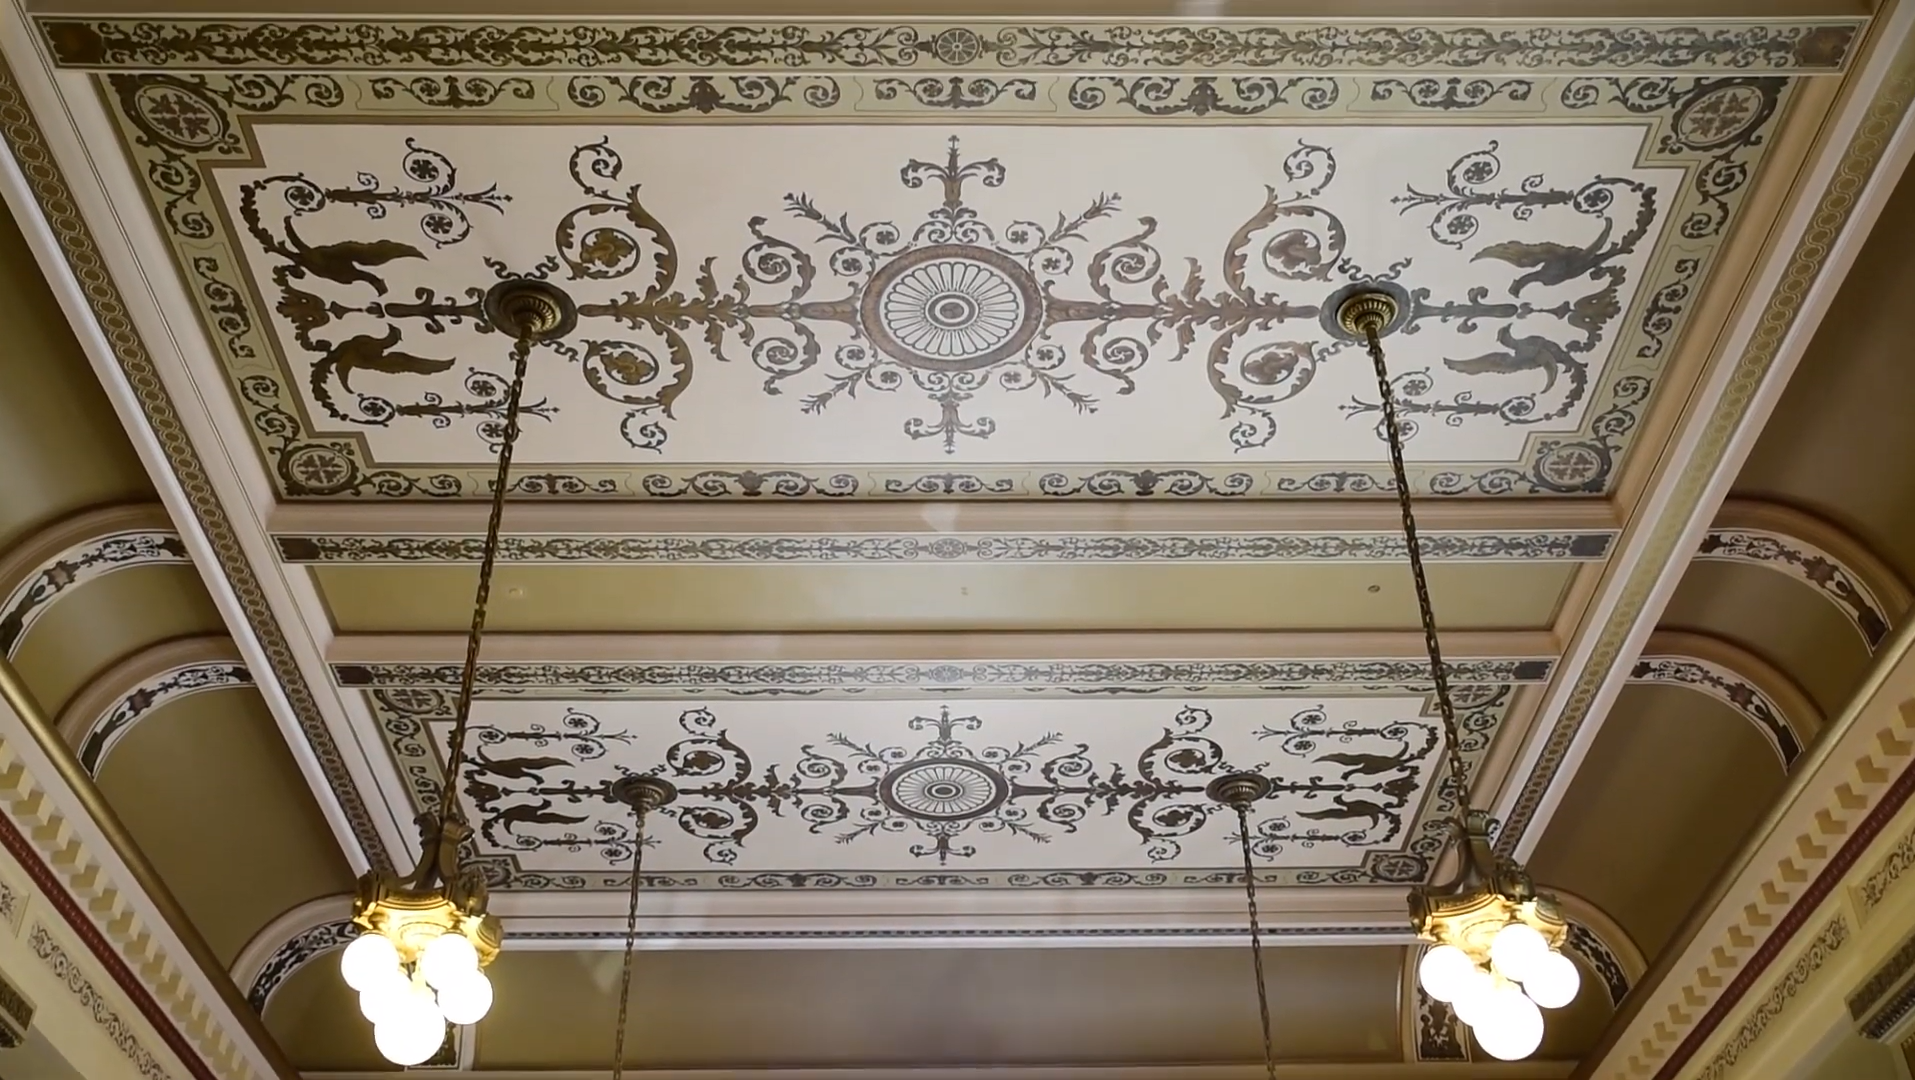 Ceiling of the courtroom in the North Carolina Court of Appeals